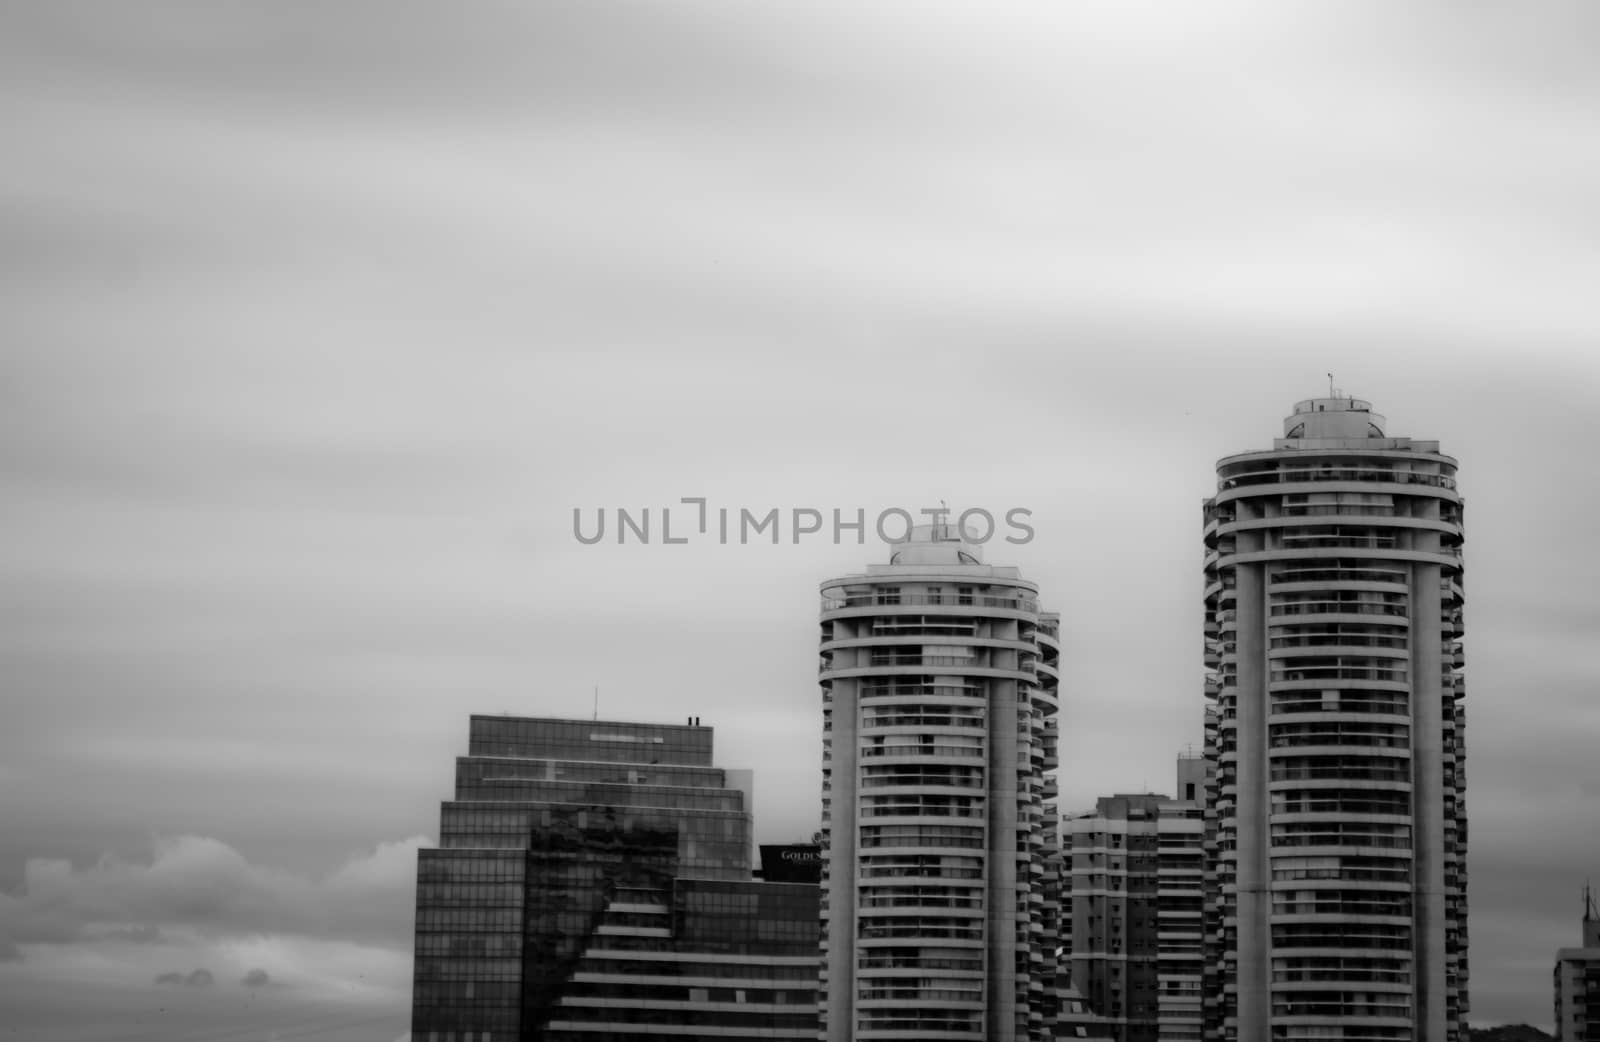 Skyline of skyscrapers in black and white